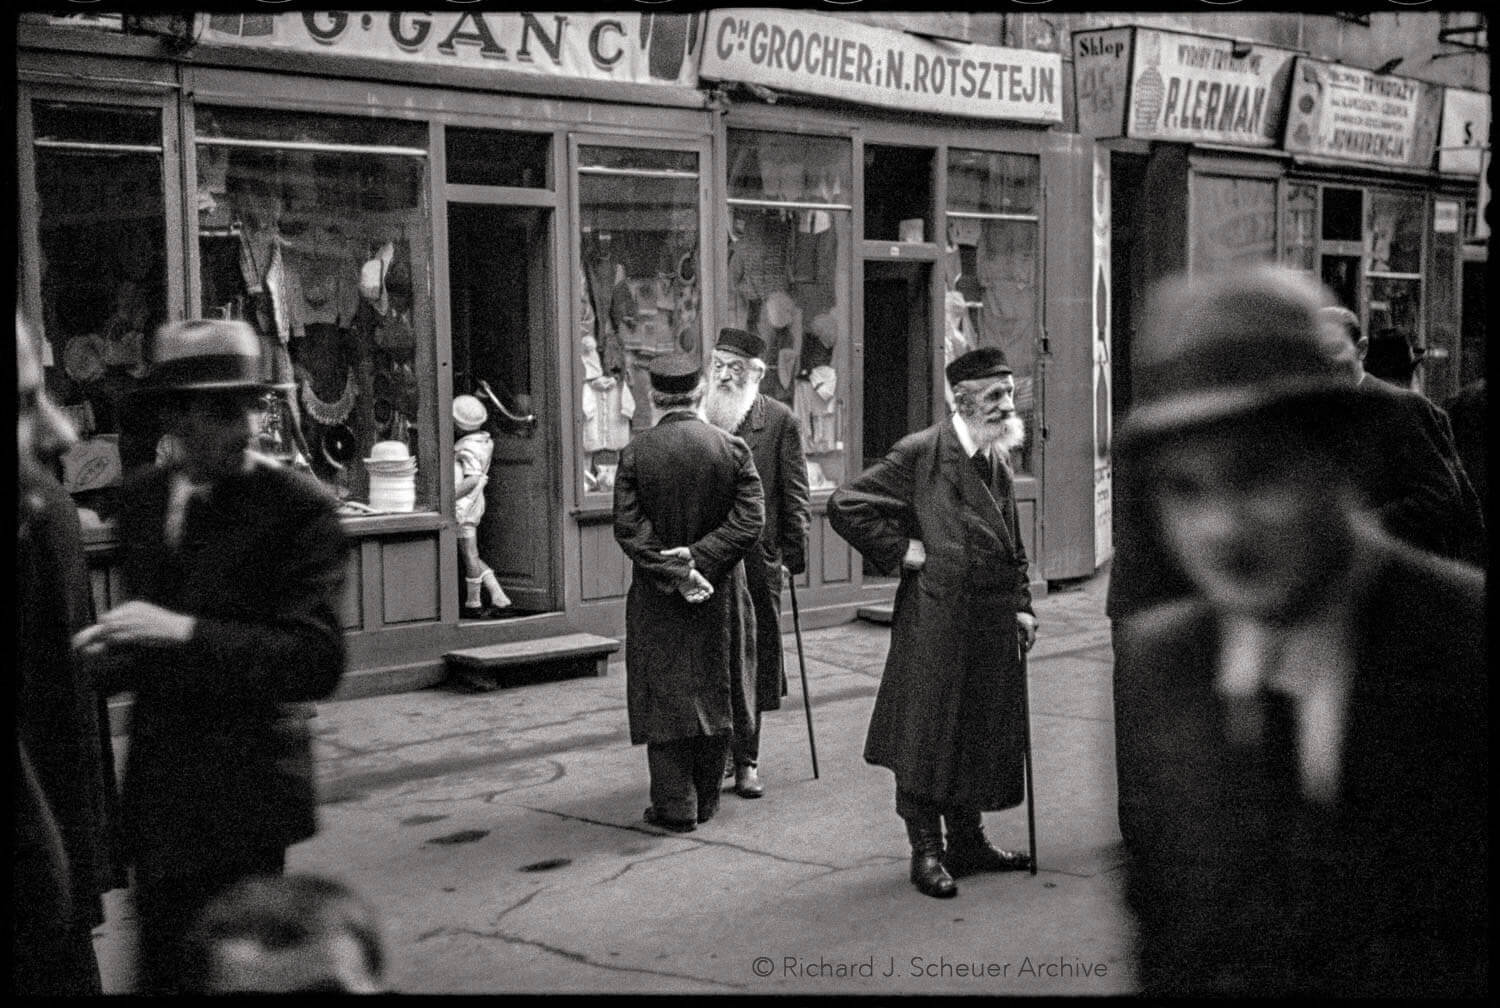 A street scene in Warsaw captured by a young Richard Scheuer.